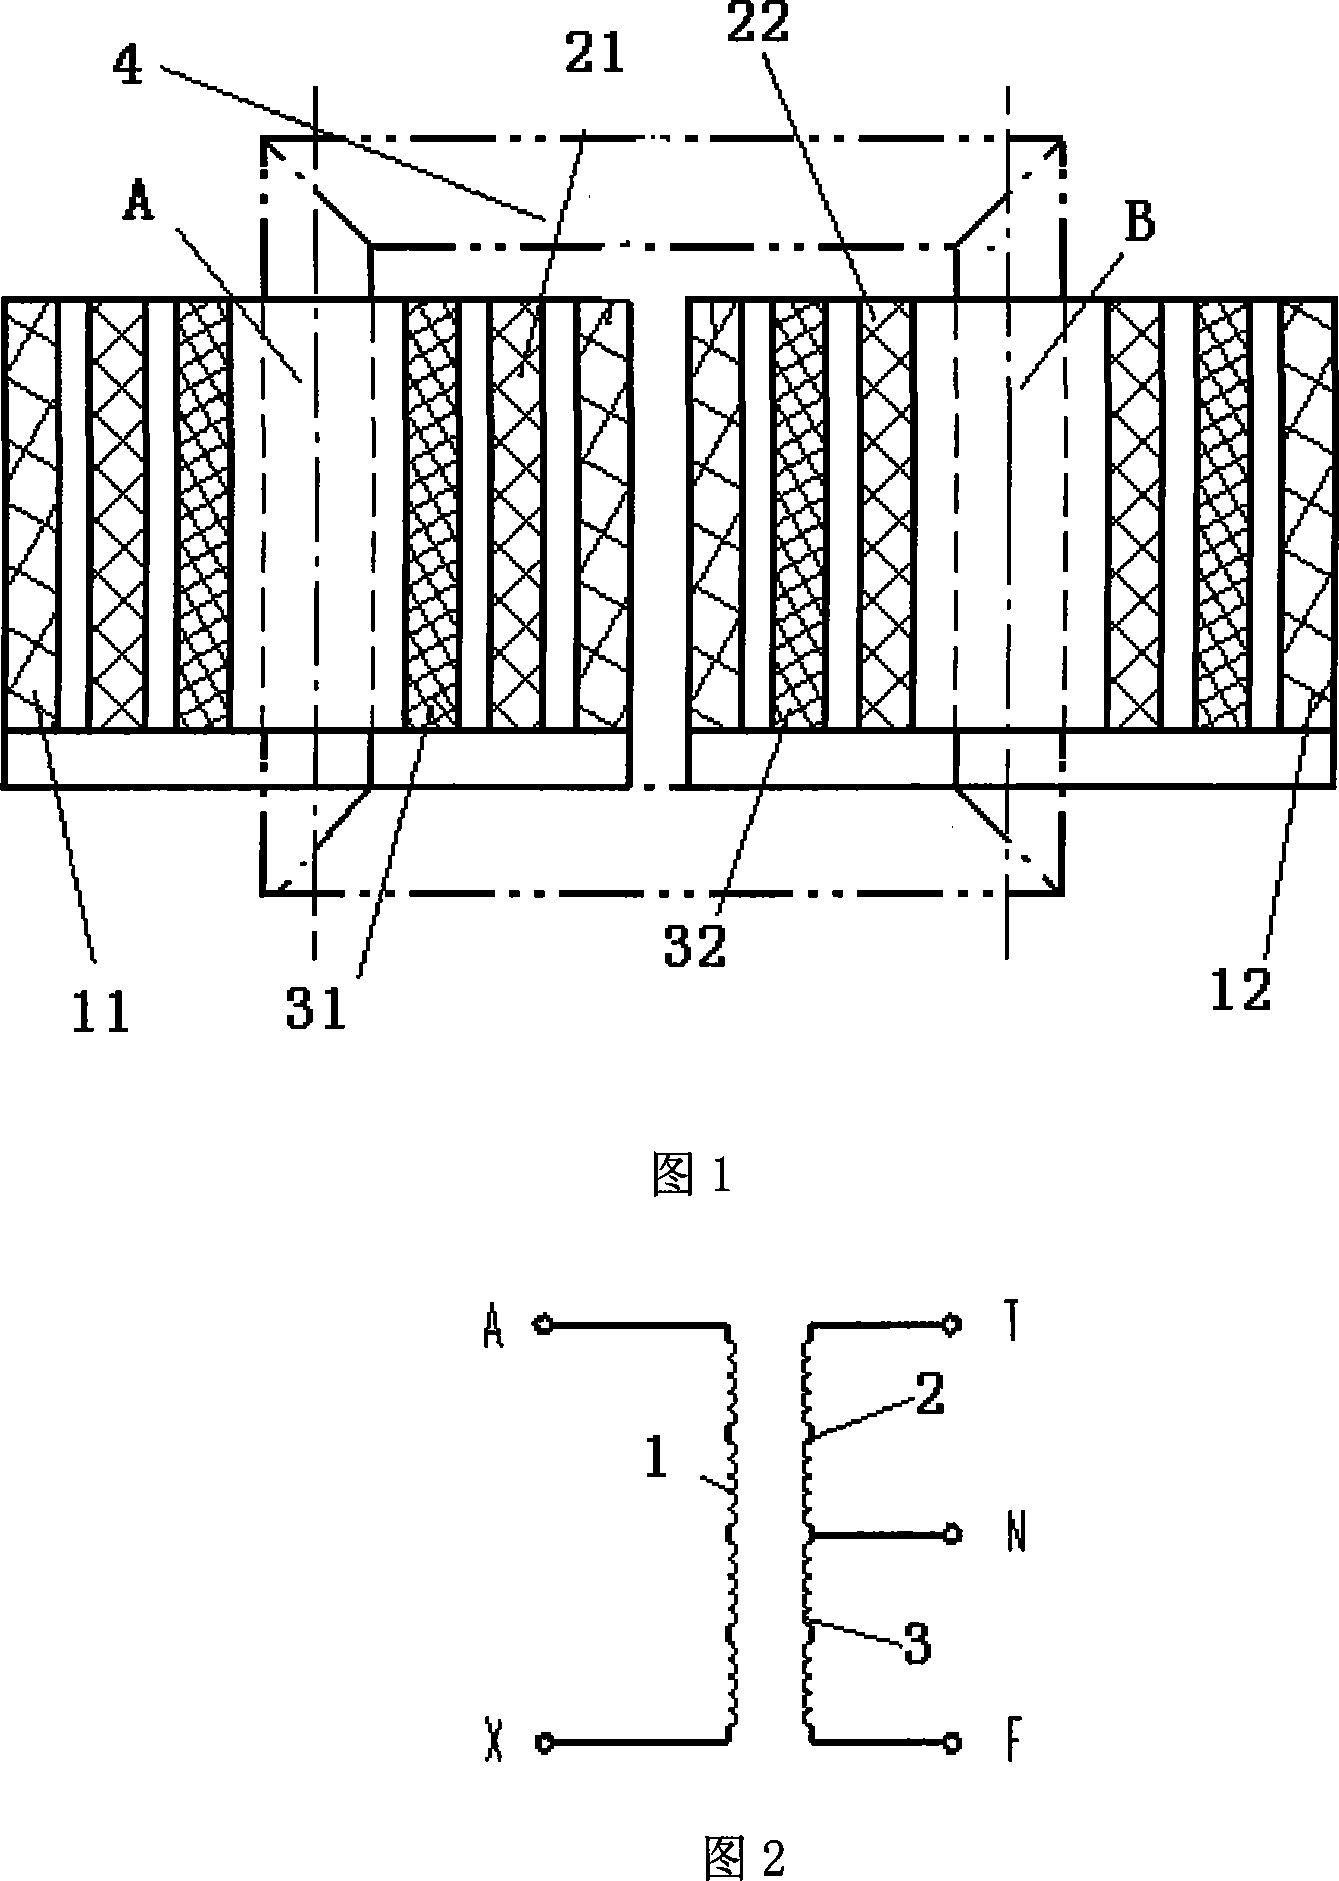 Single-phase or Vx connection traction transformer coiling structure for electric railway AT power supply mode